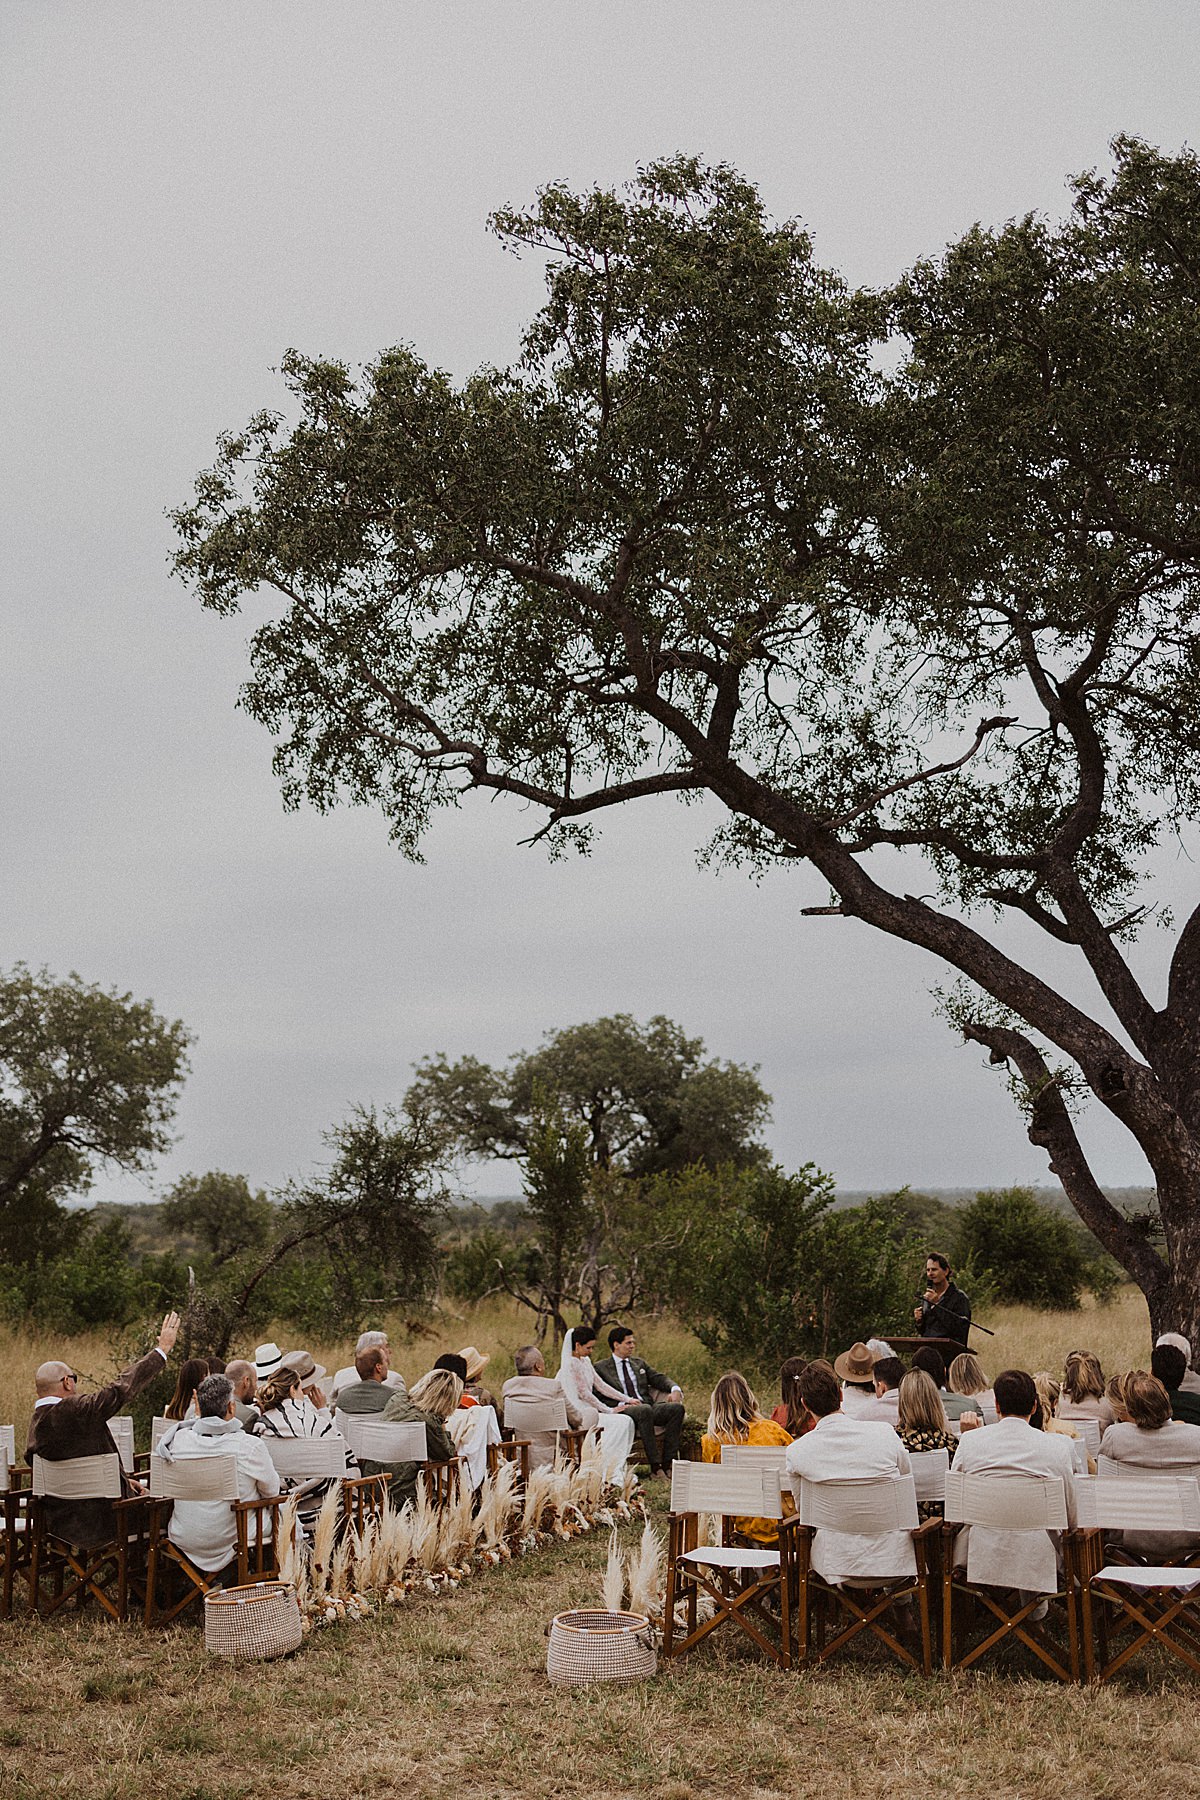 Ceremony out in the african bushveld surrounded by wildlife.